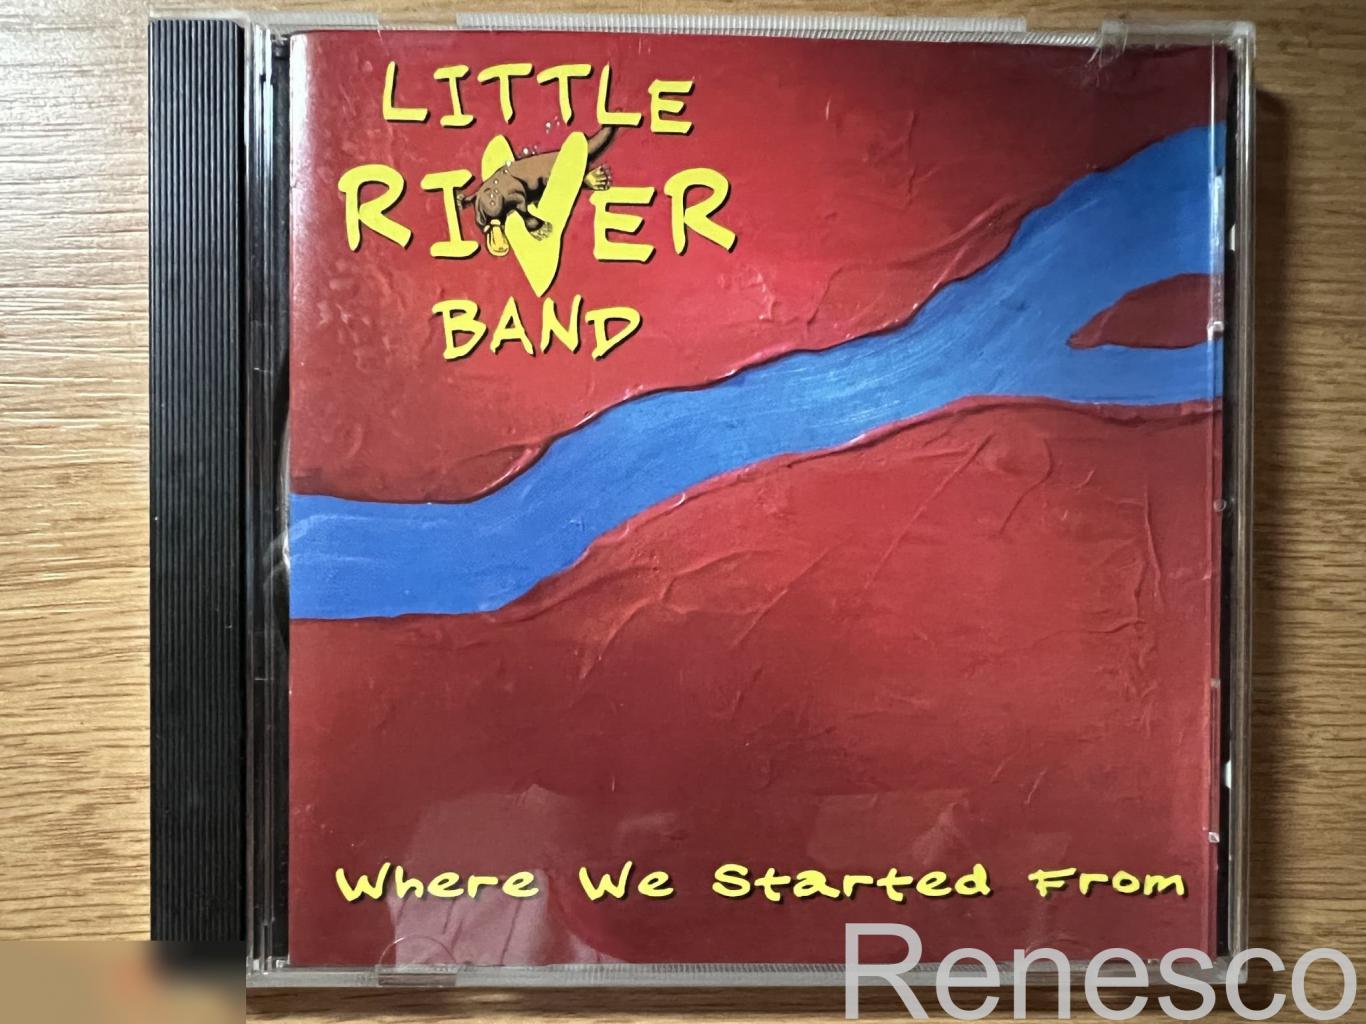 Little River Band – Where We Started From (USA) (2001)